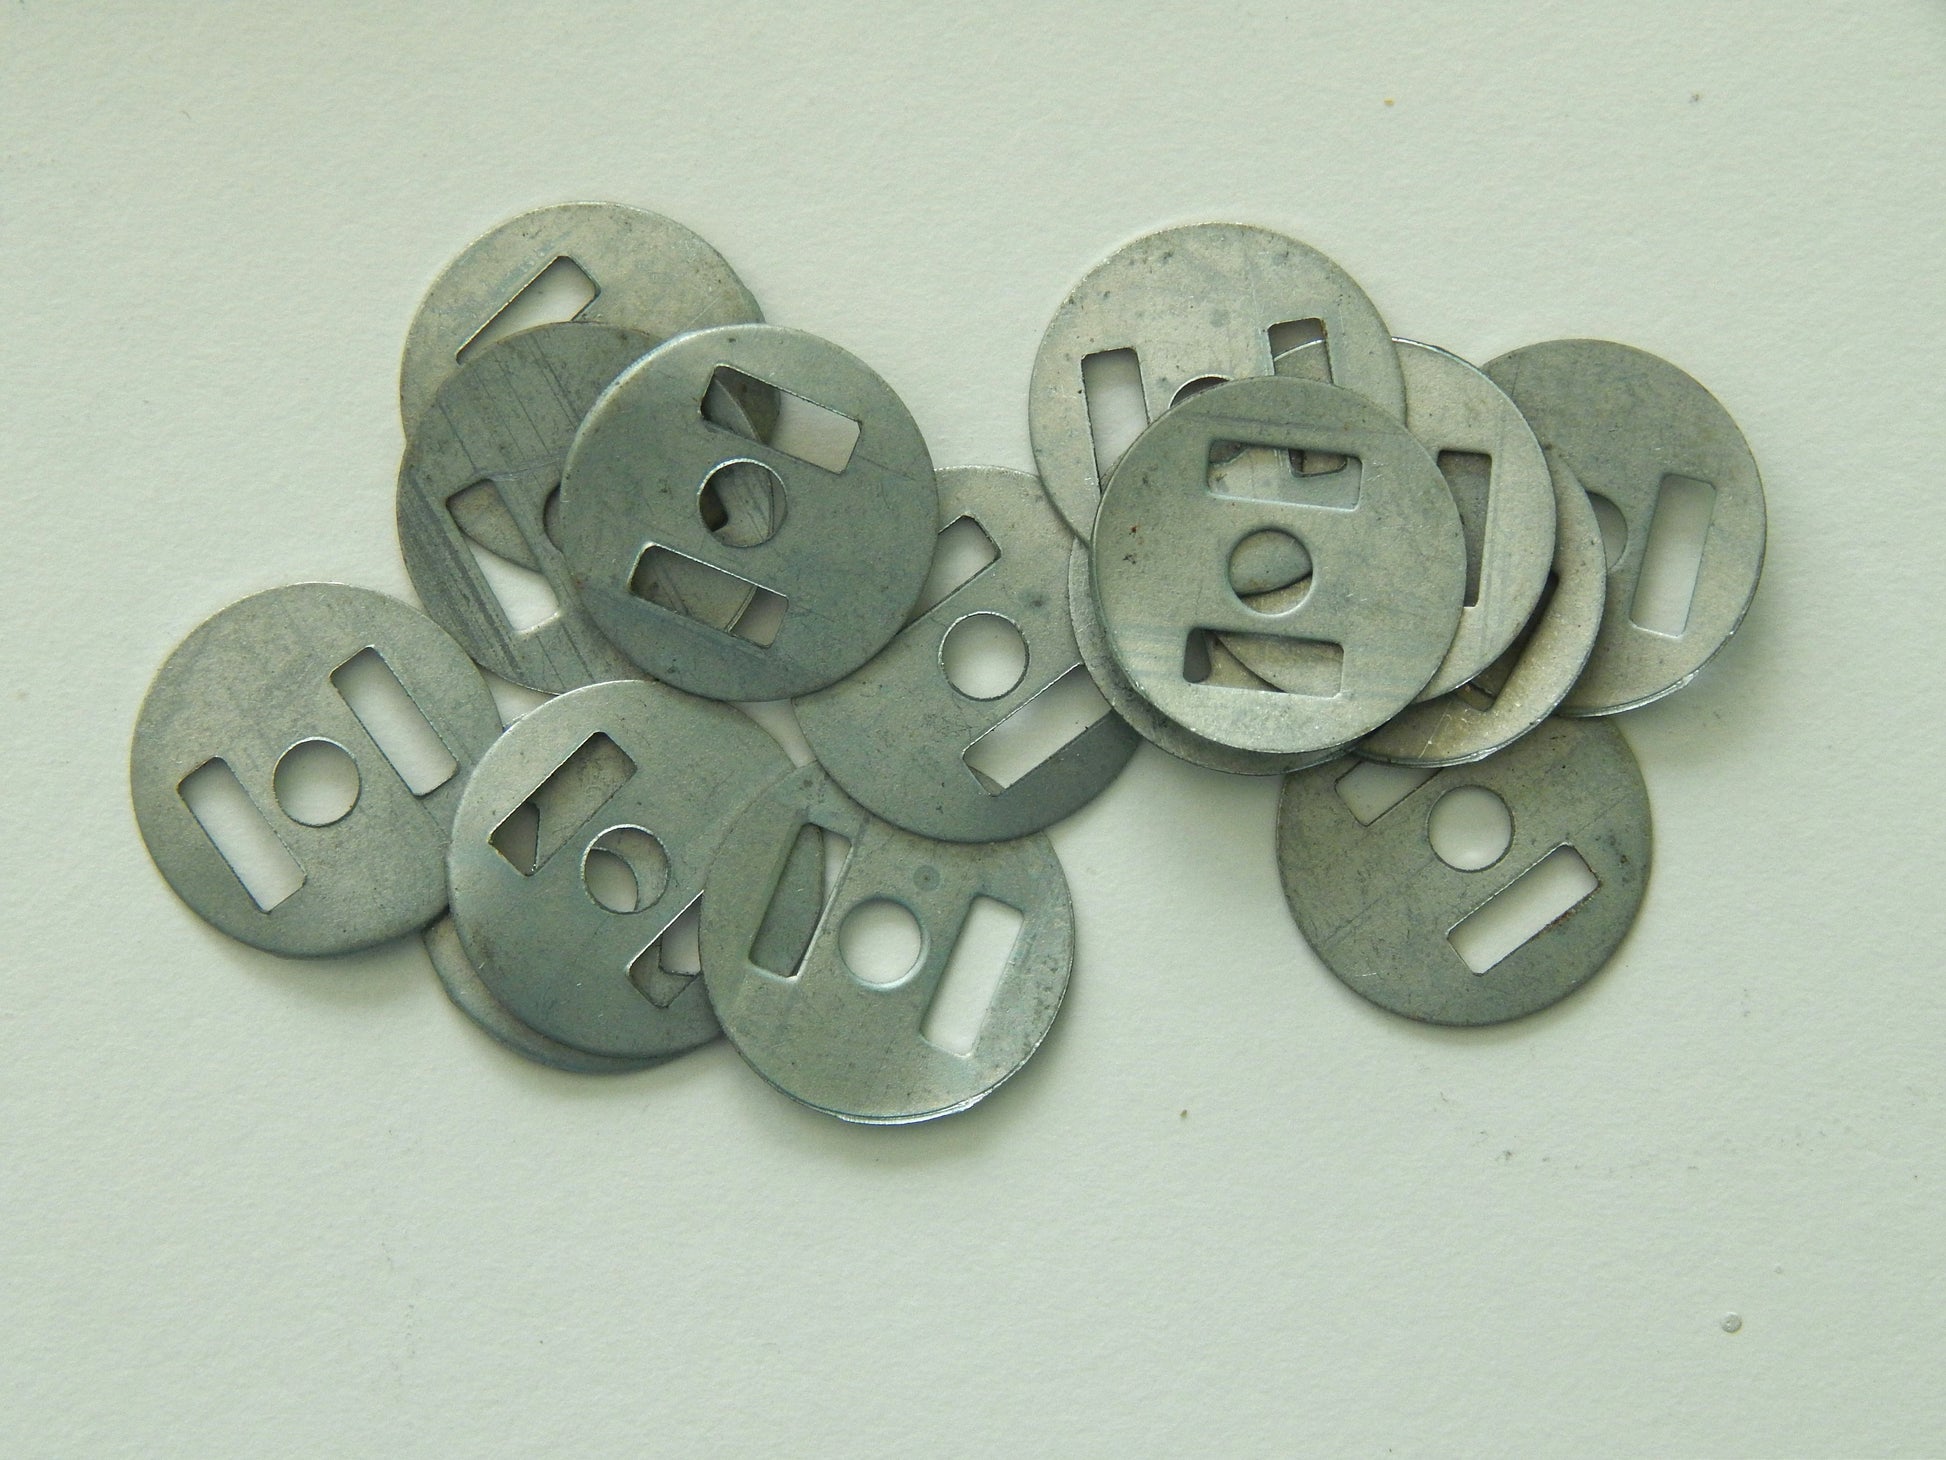 backings for magnetic snaps